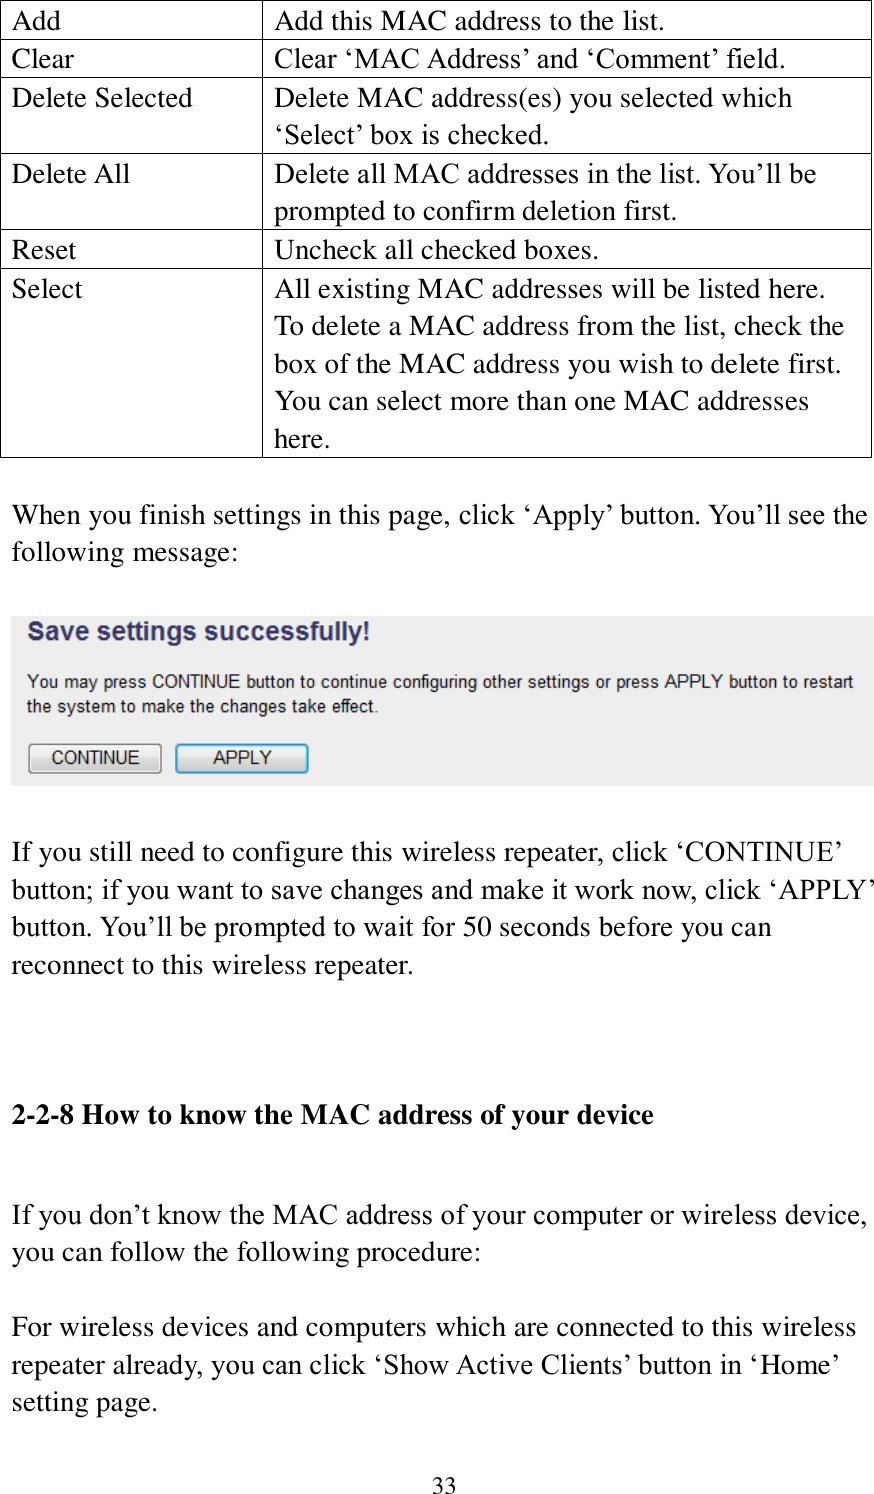 33 Add Add this MAC address to the list. Clear Clear ‘MAC Address’ and ‘Comment’ field. Delete Selected Delete MAC address(es) you selected which ‘Select’ box is checked. Delete All Delete all MAC addresses in the list. You’ll be prompted to confirm deletion first. Reset Uncheck all checked boxes. Select All existing MAC addresses will be listed here. To delete a MAC address from the list, check the box of the MAC address you wish to delete first. You can select more than one MAC addresses here.  When you finish settings in this page, click ‘Apply’ button. You’ll see the following message:   If you still need to configure this wireless repeater, click ‘CONTINUE’ button; if you want to save changes and make it work now, click ‘APPLY’ button. You’ll be prompted to wait for 50 seconds before you can reconnect to this wireless repeater.    2-2-8 How to know the MAC address of your device  If you don’t know the MAC address of your computer or wireless device, you can follow the following procedure:  For wireless devices and computers which are connected to this wireless repeater already, you can click ‘Show Active Clients’ button in ‘Home’ setting page. 